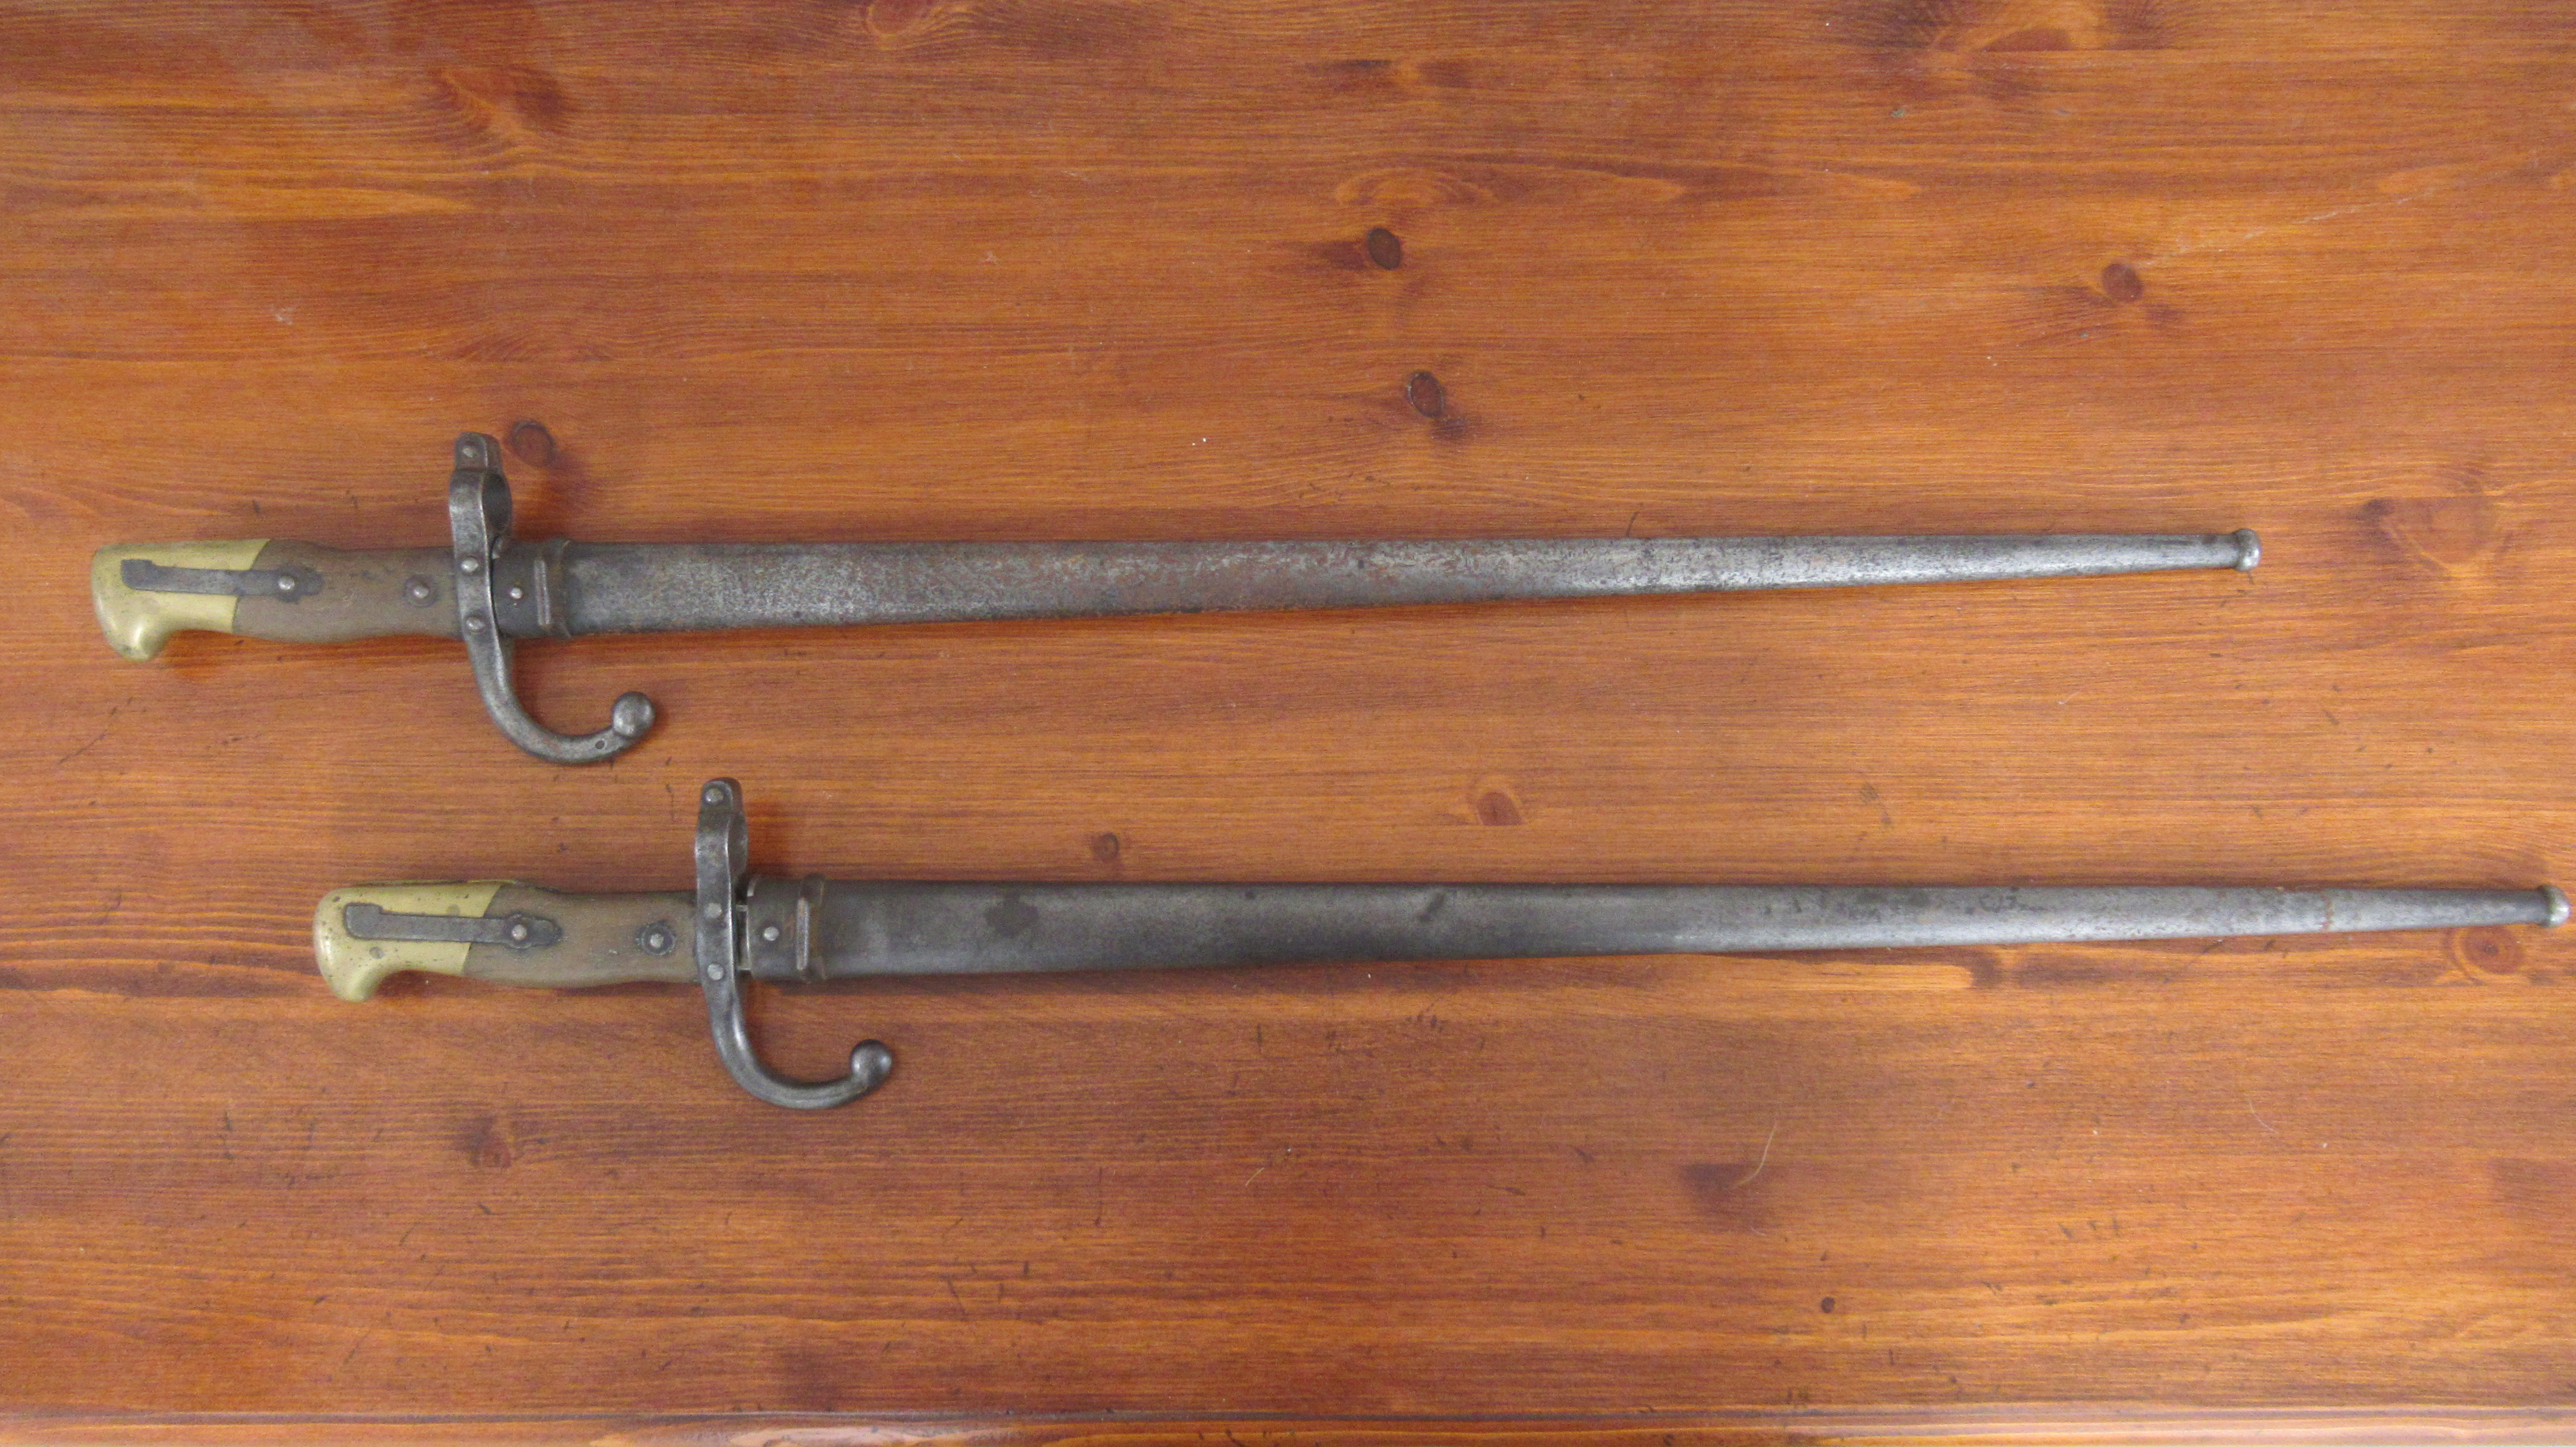 Two French 1874 pattern gras bayonets dated 1877 and 1879, 51cm blades with steel scabbards